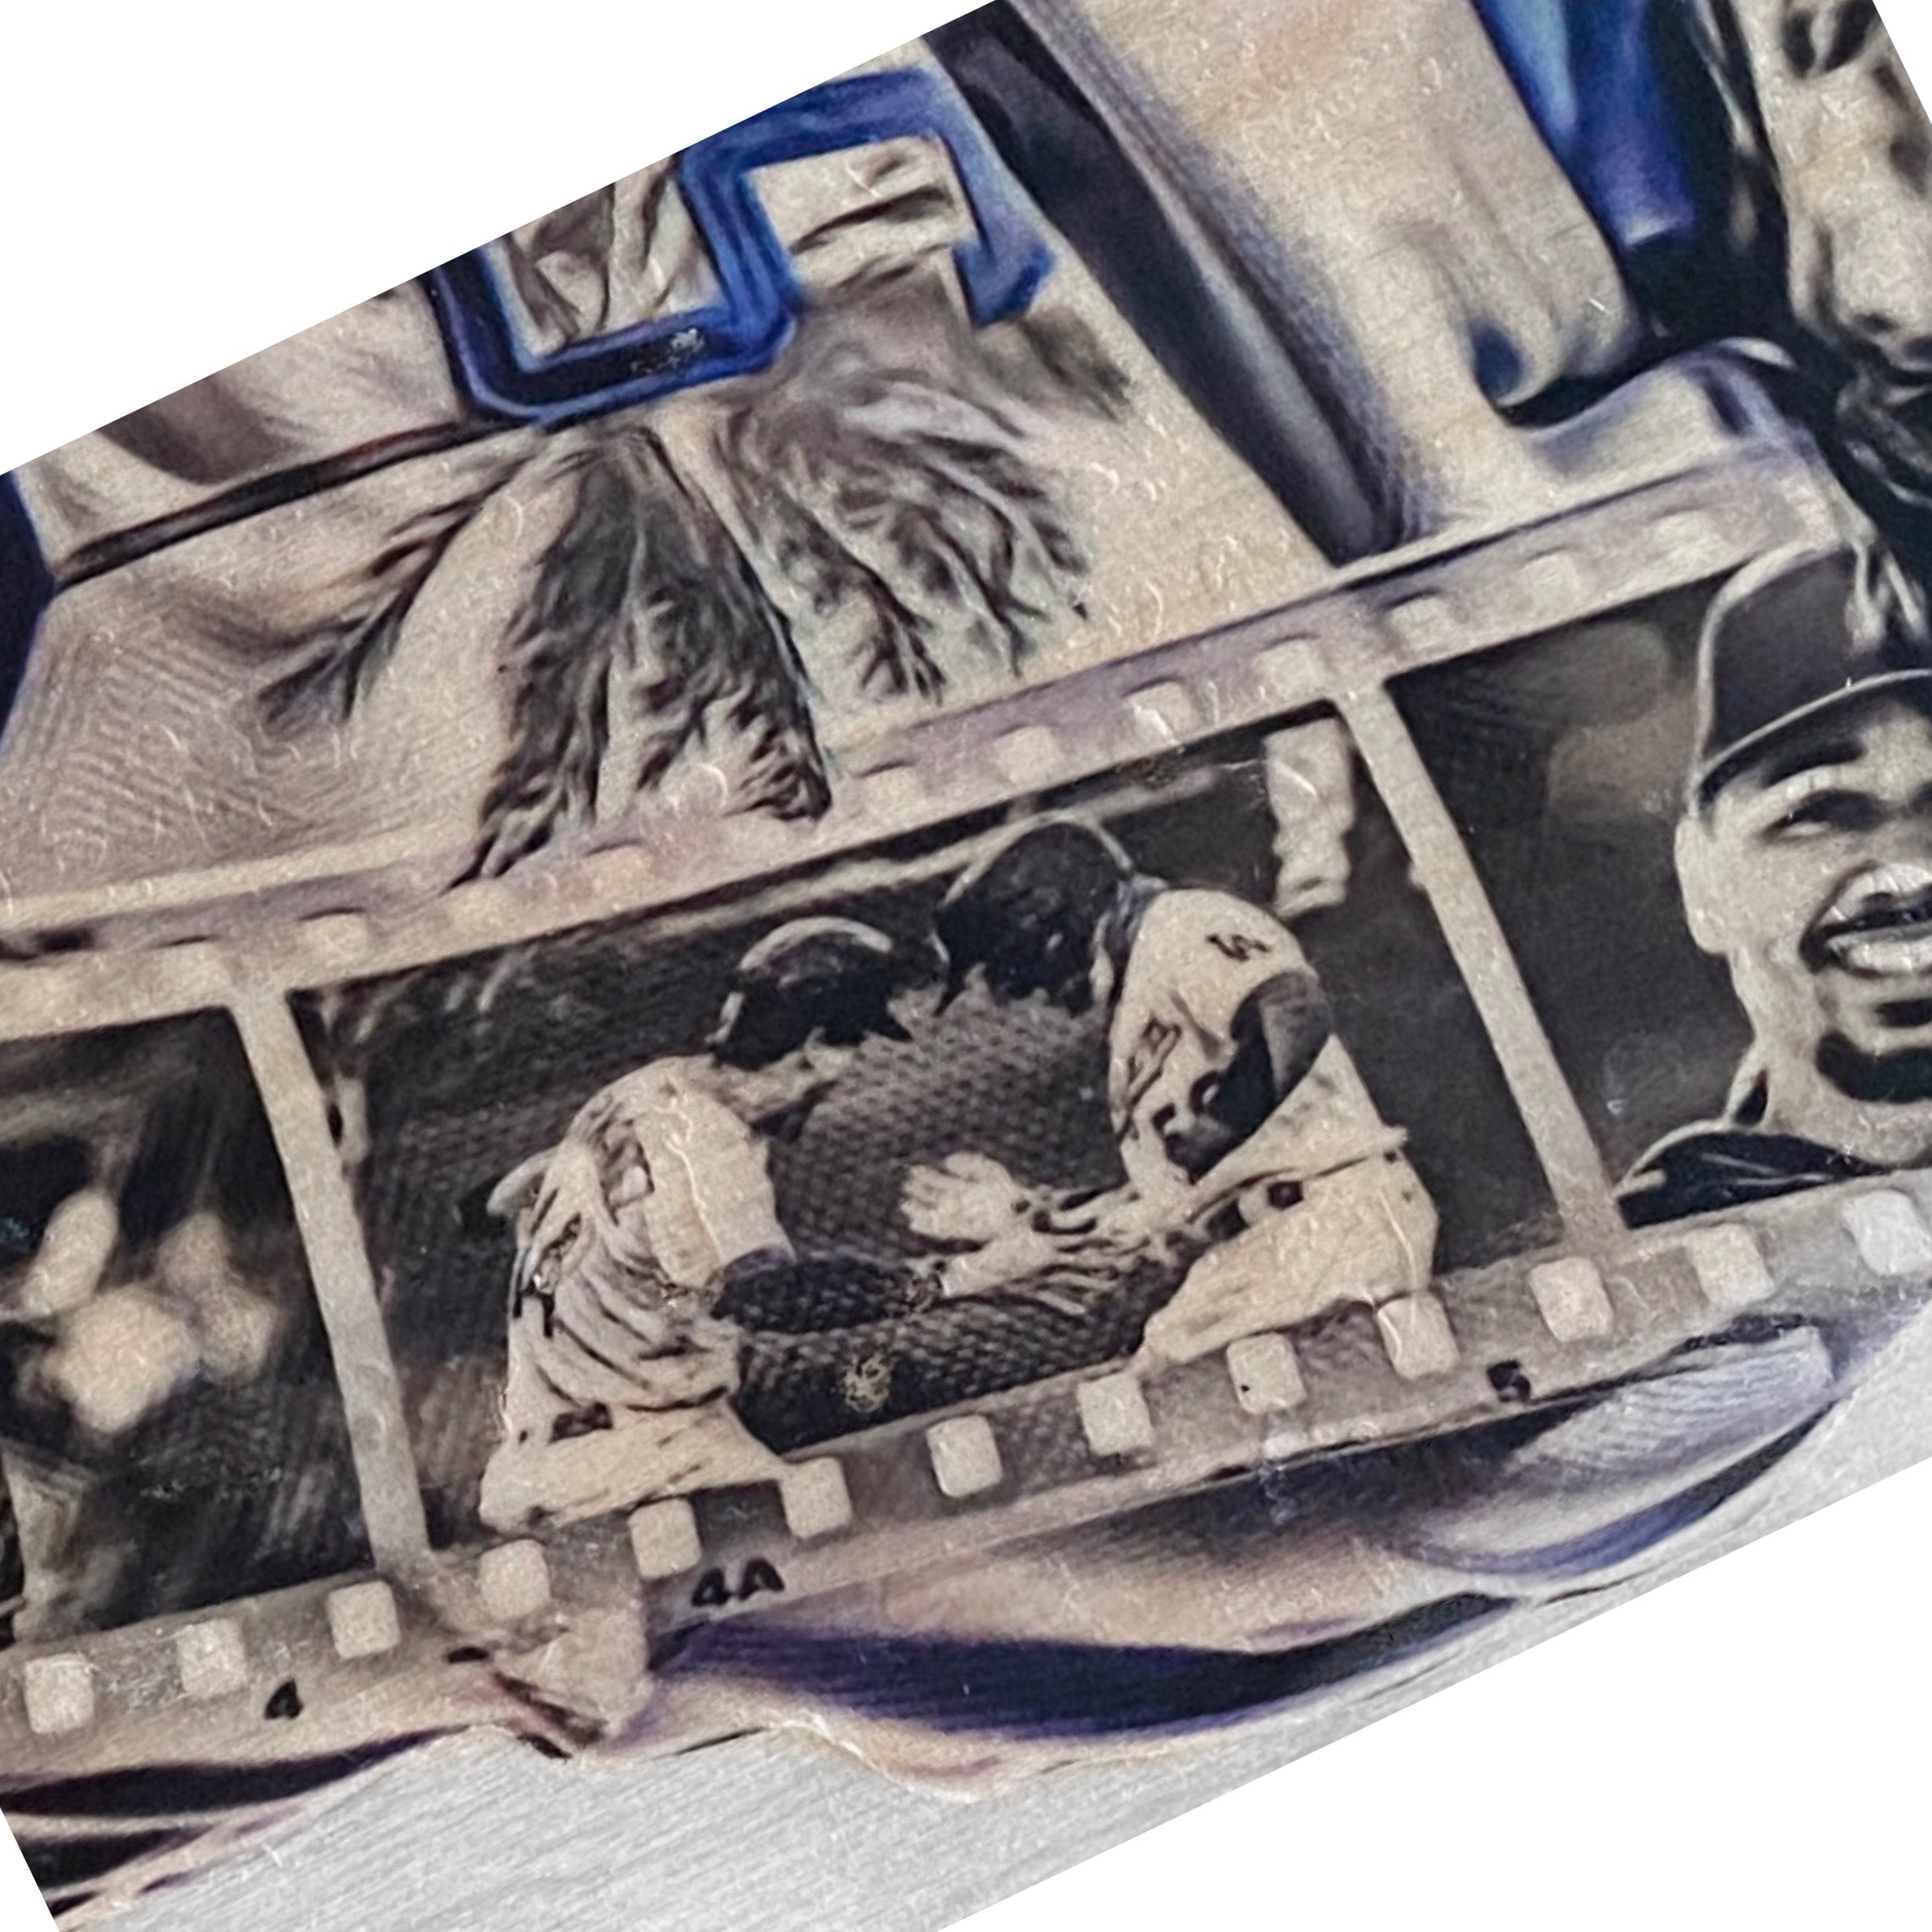 The Los Angeles Dodgers: Mookie Betts – Canvas Edits